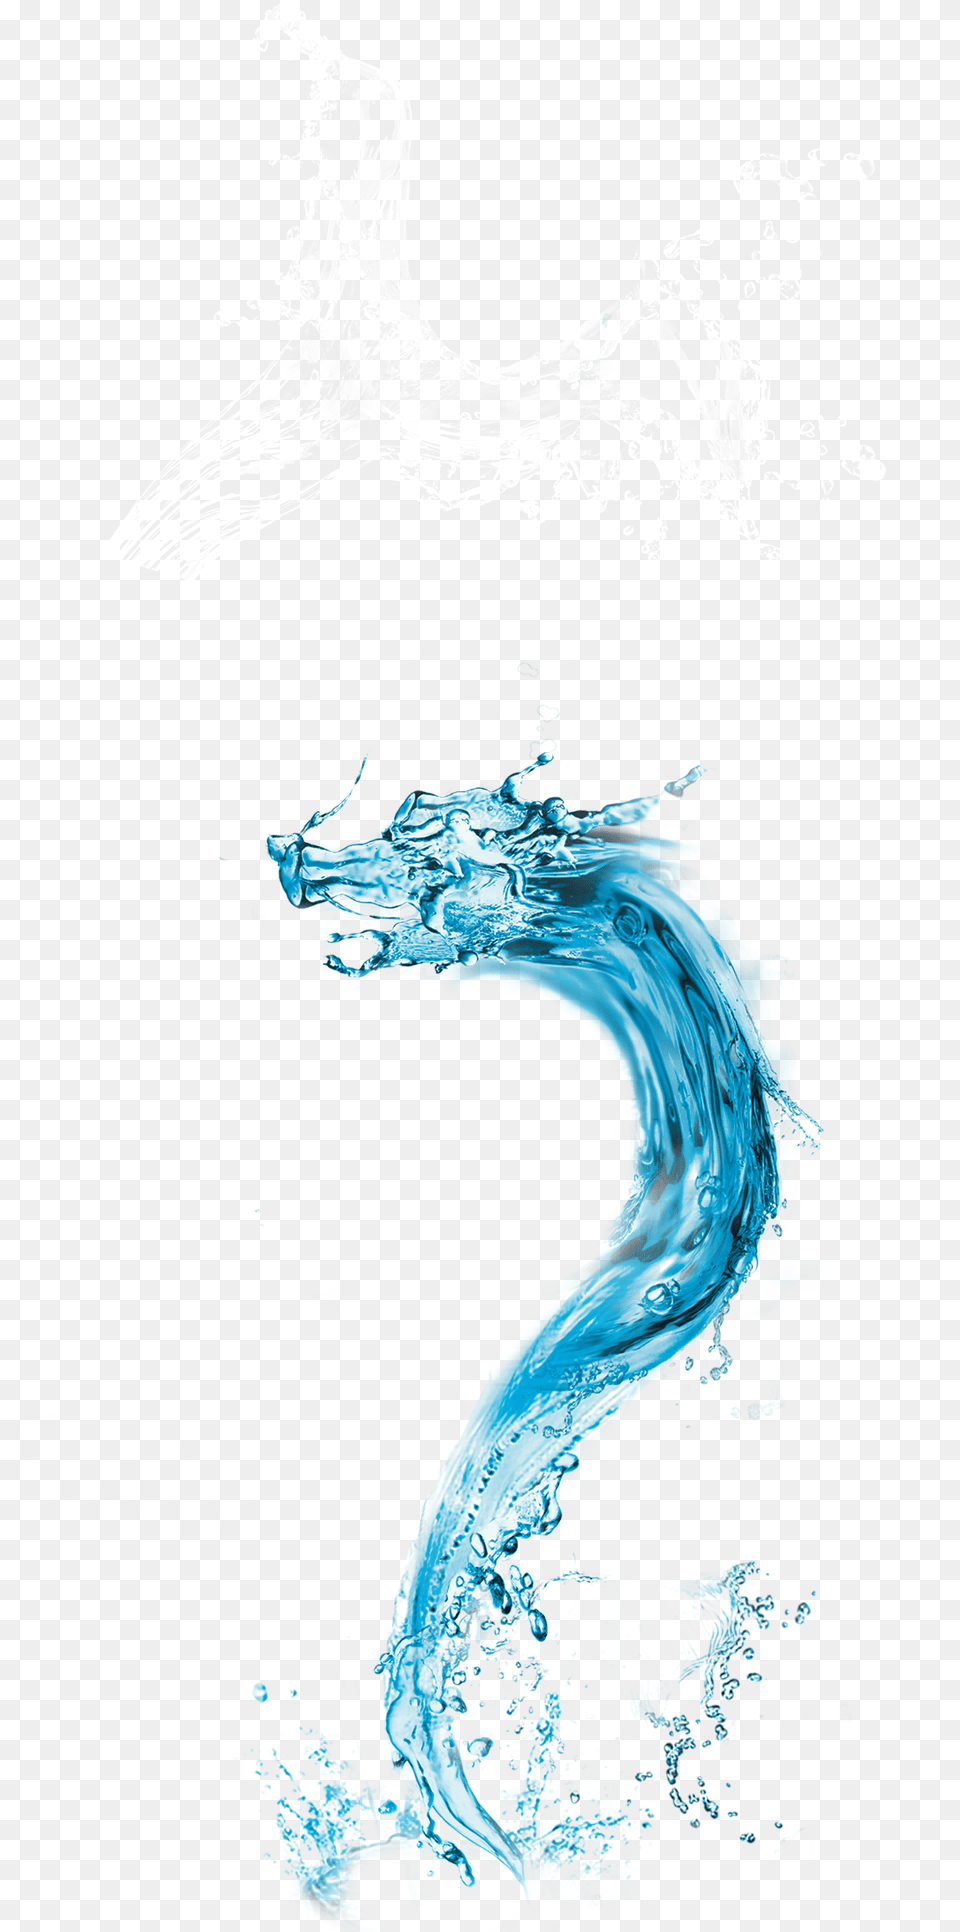 Water Effects Long Transparent Hq Clipart Water Effects, Outdoors, Sea, Nature, Sea Waves Png Image